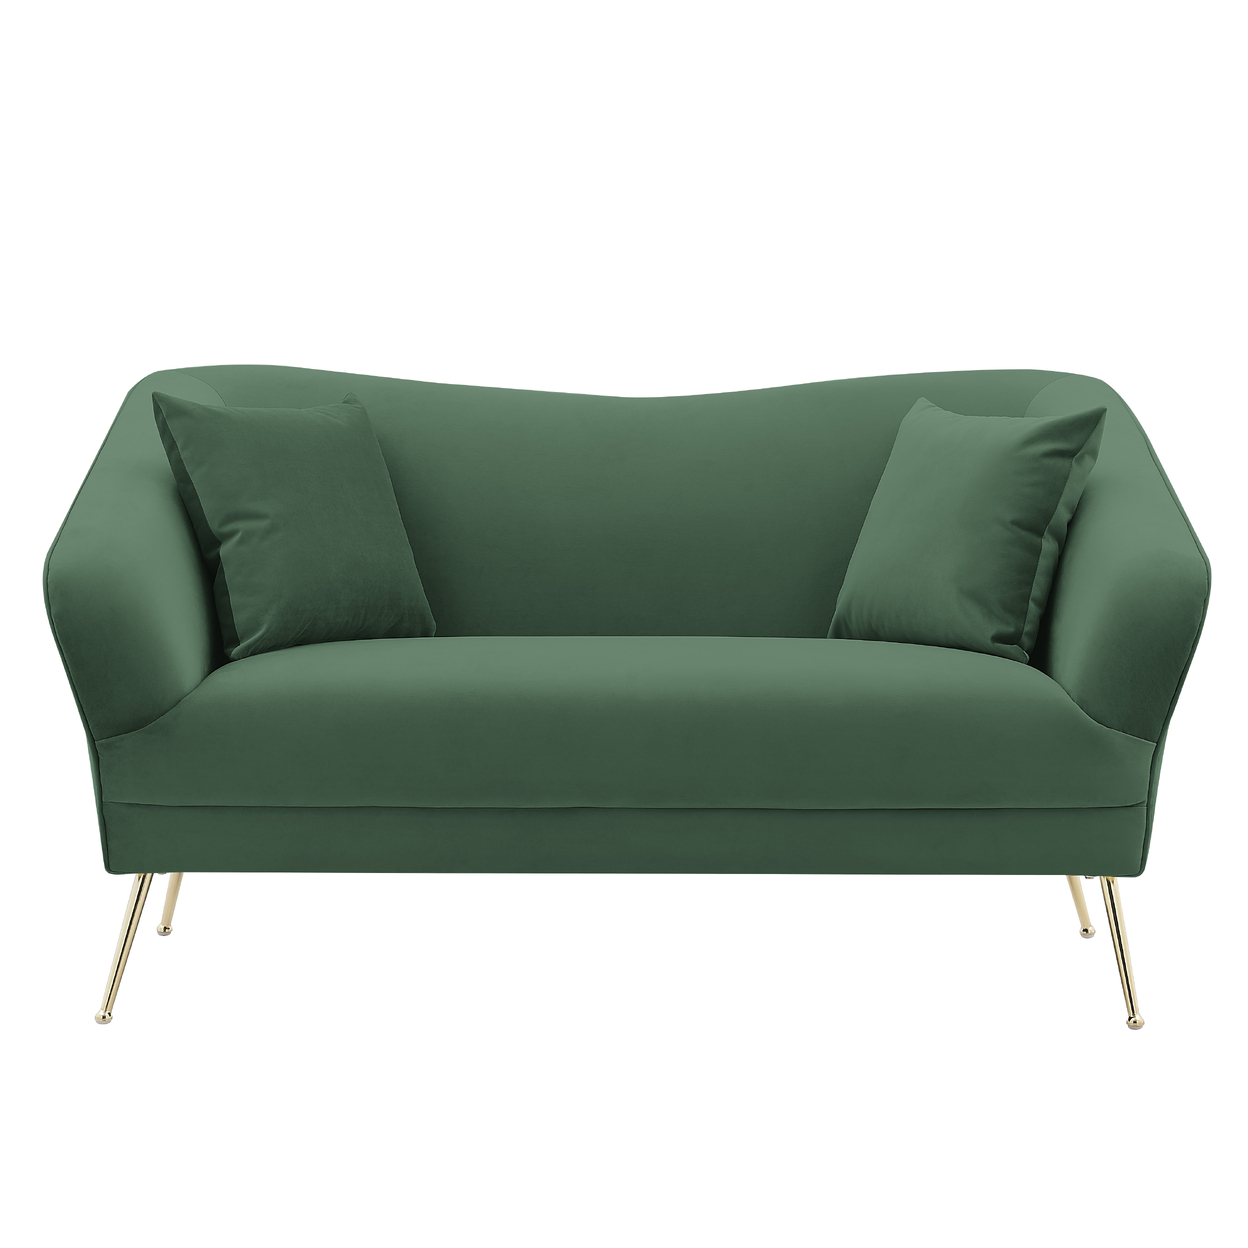 Iconic Home Ember Loveseat Velvet Upholstered Tight Seat Back Design Flared Gold Tone Metal Legs With 2 Decorative Pillows - Dark Green